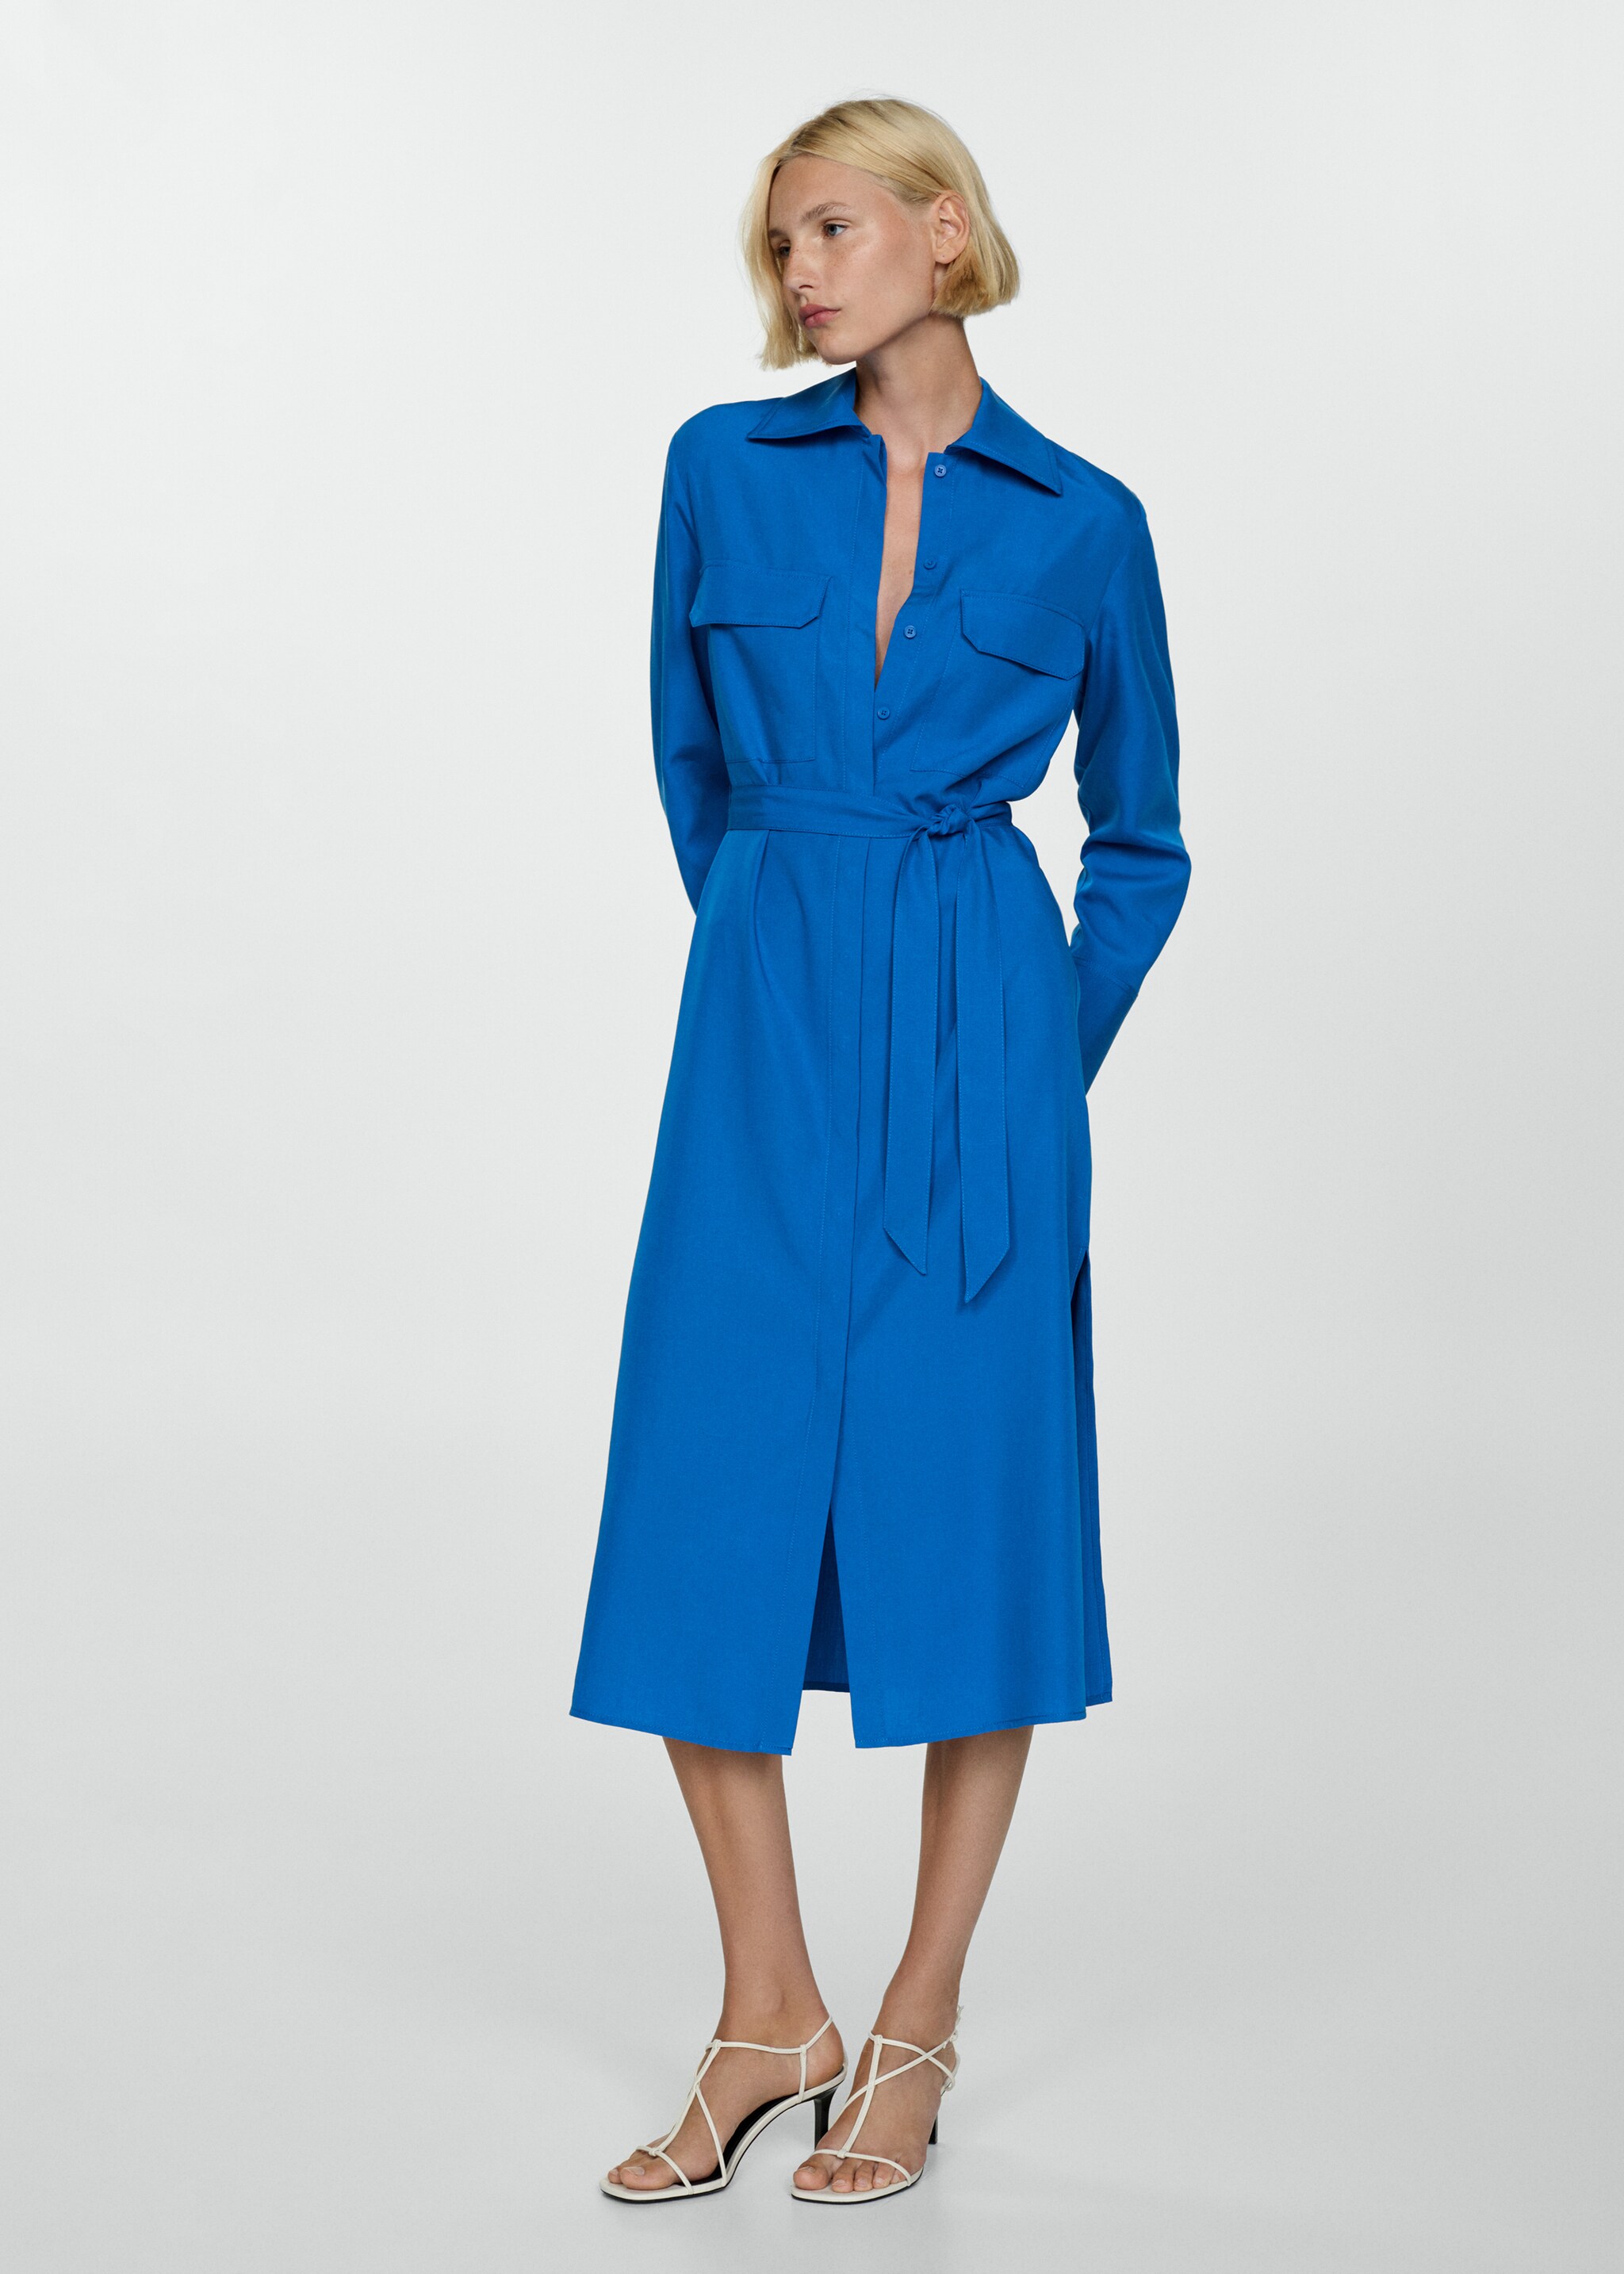 Lyocell shirt dress with bow - General plane